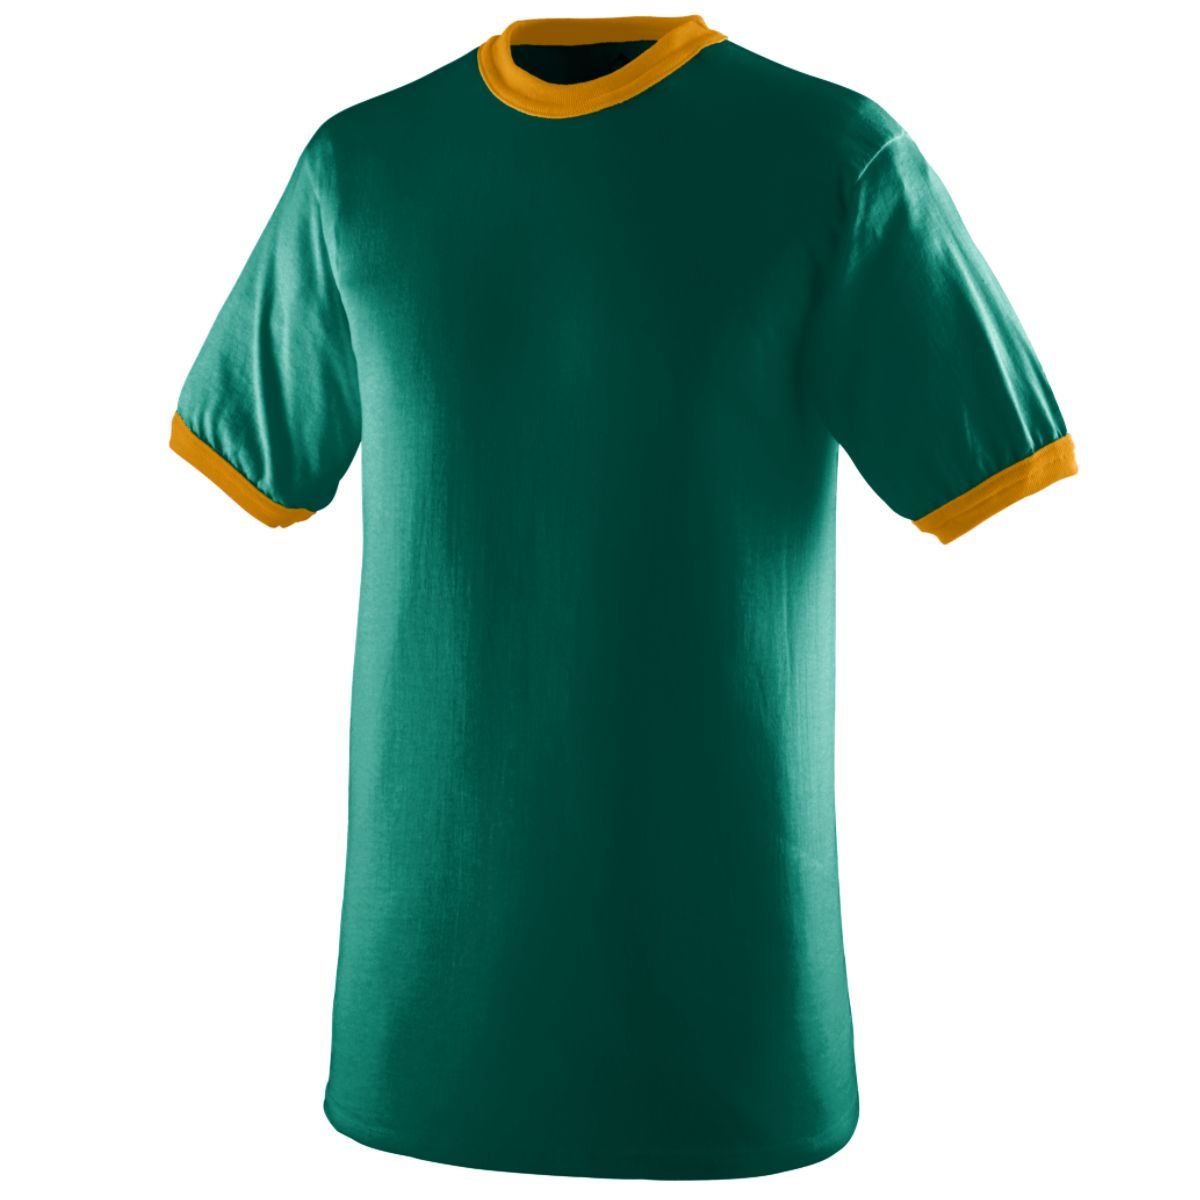 Augusta Sportswear Youth-Ringer T-Shirt in Dark Green/Gold  -Part of the Youth, Youth-Tee-Shirt, T-Shirts, Augusta-Products, Soccer, Shirts, All-Sports-1 product lines at KanaleyCreations.com